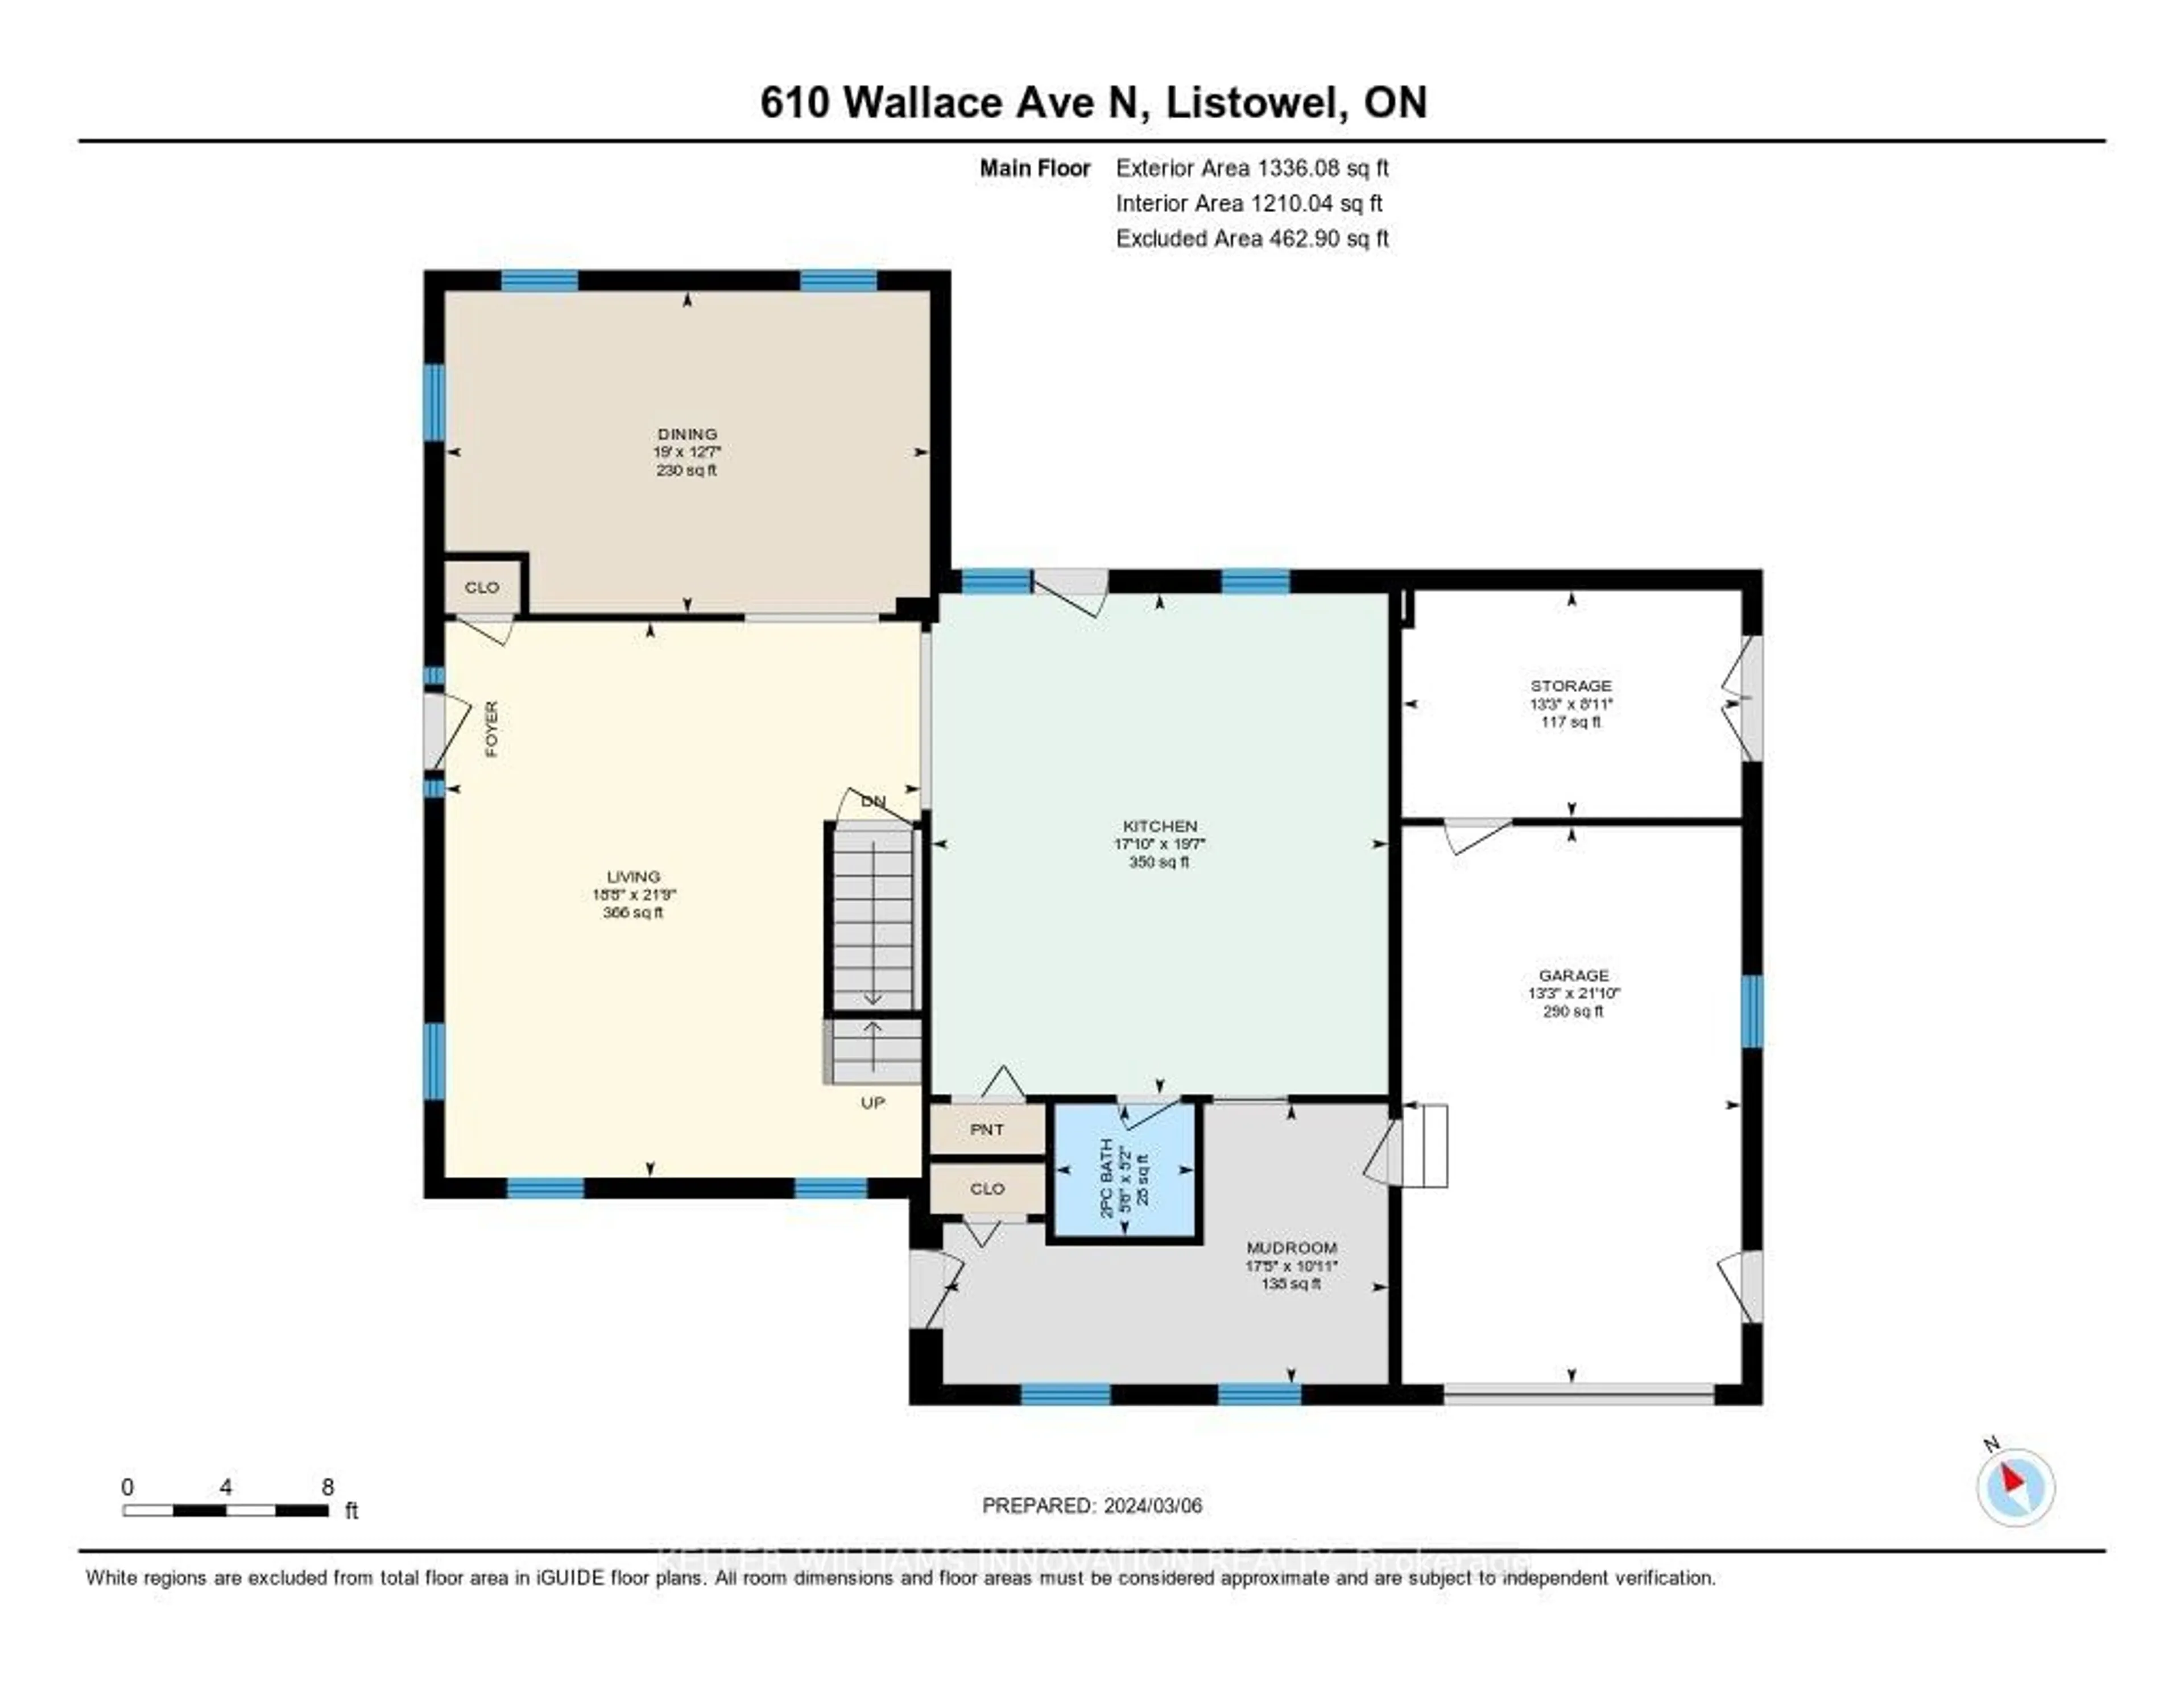 Floor plan for 610 Wallace Ave, North Perth Ontario N4W 1M1